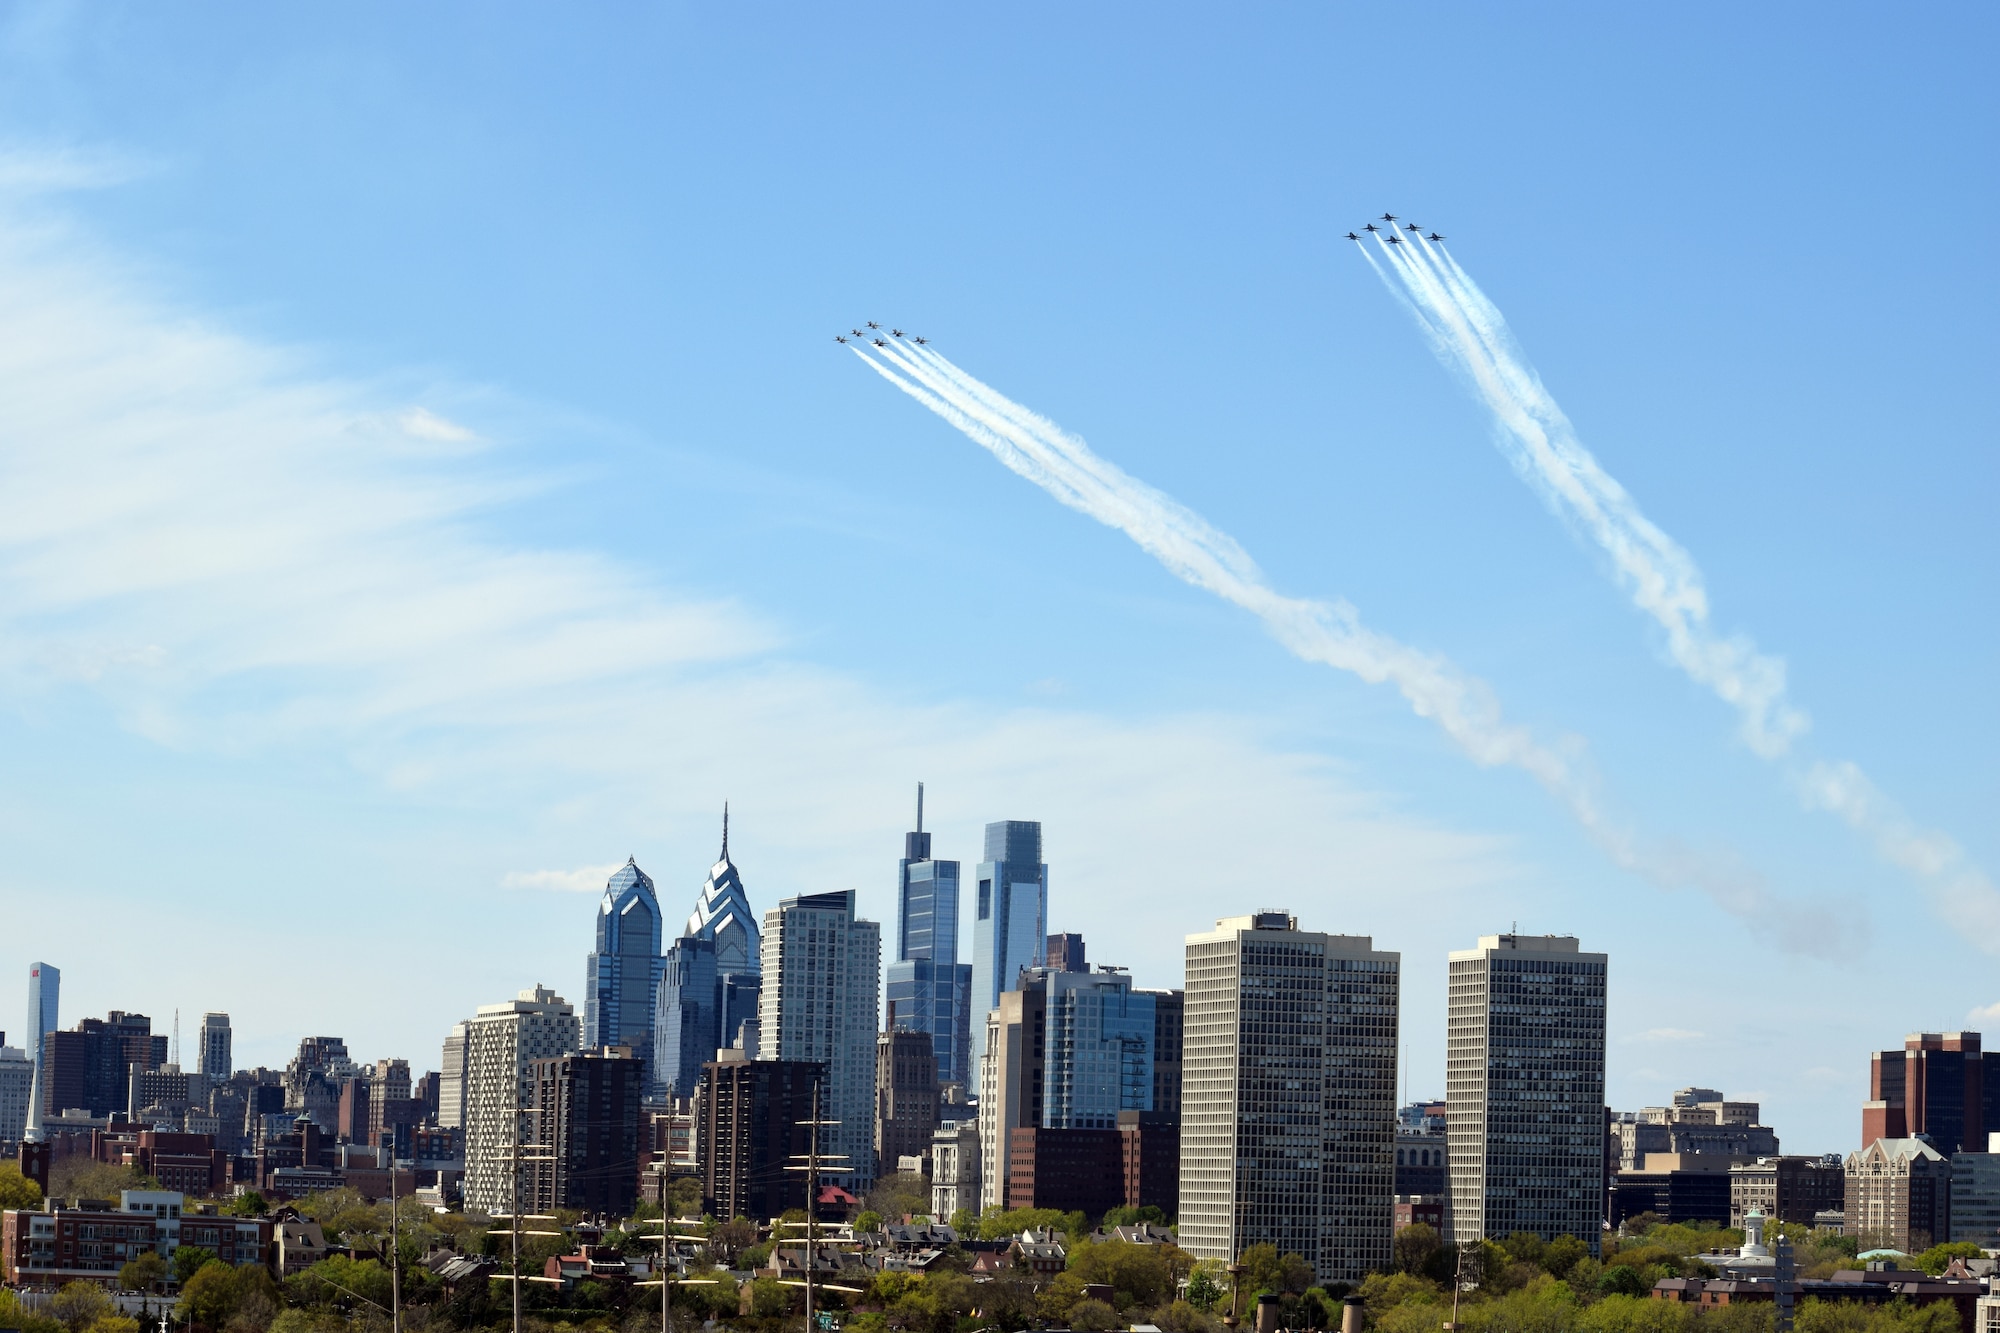 The U.S. Air Force Thunderbirds and the U.S. Navy Blue Angels fly over Philadelphia during an America Strong flyover, April 28, 2020. The demonstration teams conducted flyovers in areas of New York, New Jersey and Pennsylvania to honor healthcare workers, first responders, and other essential personnel who are working on the front lines to combat COVID-19. (U.S. Air Force photo by Maj. Brian Wagner)